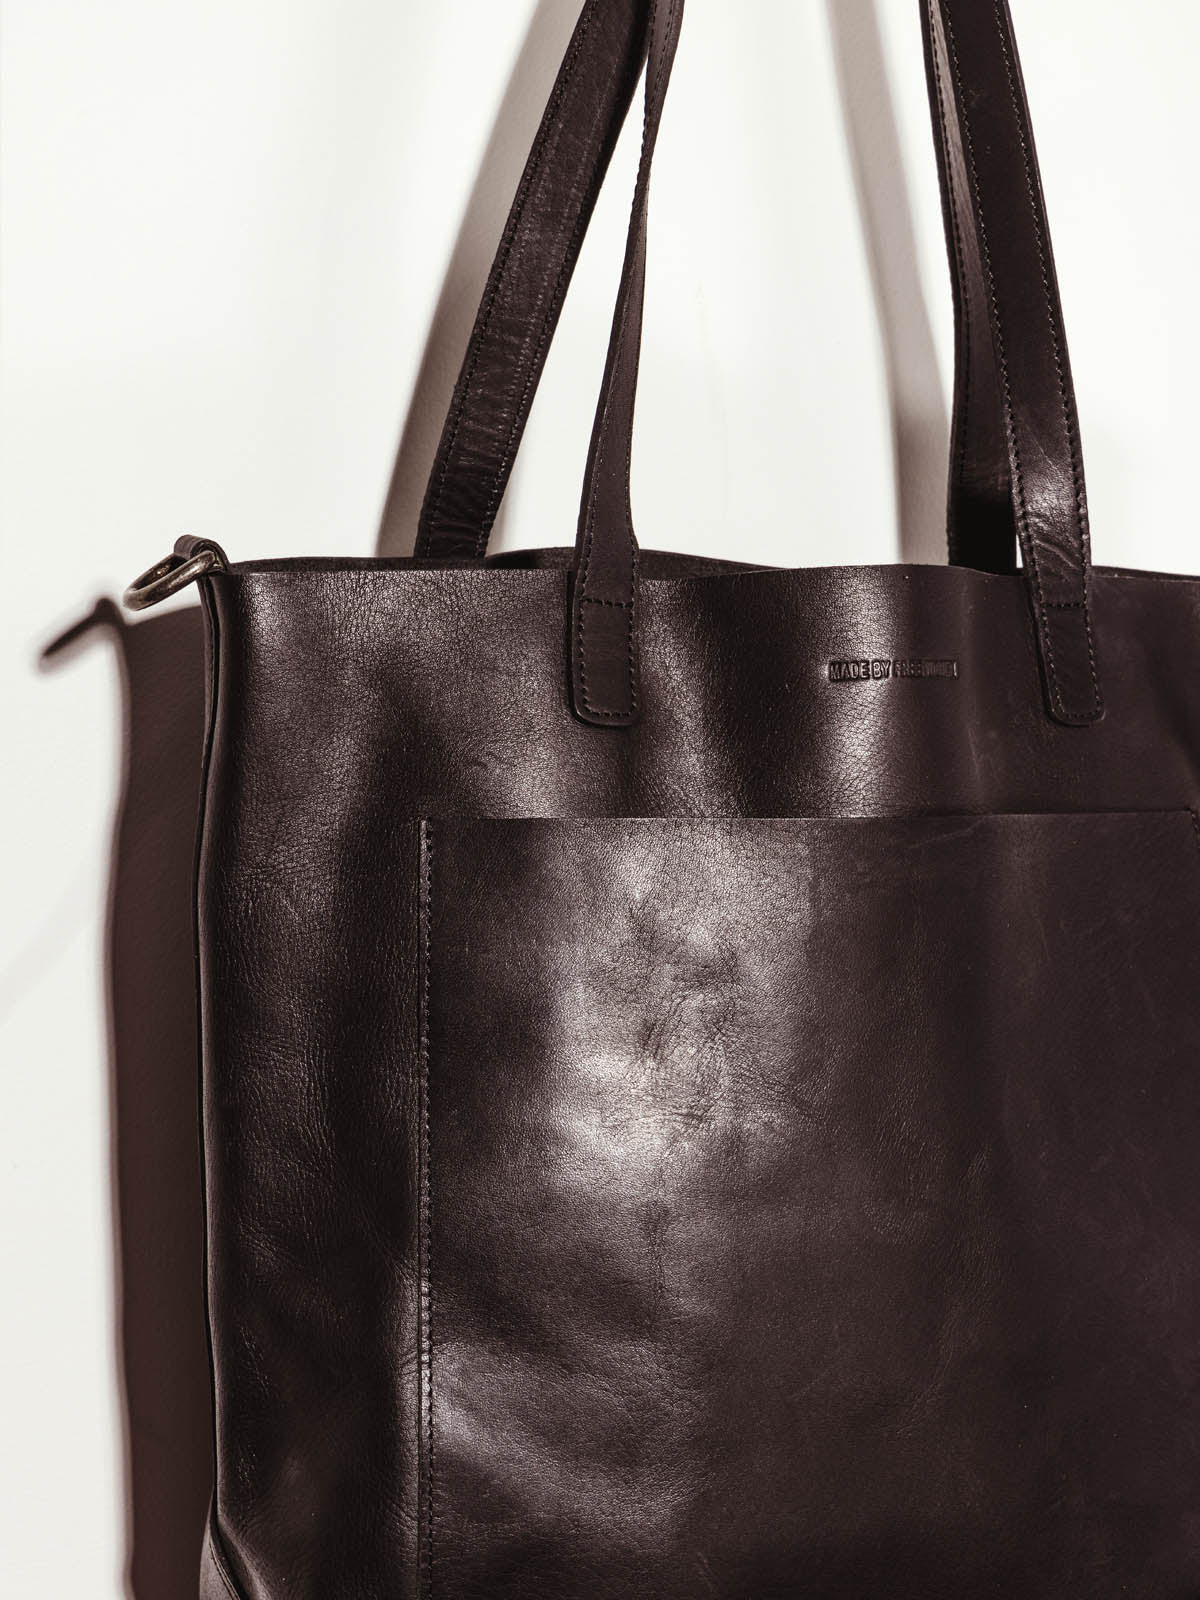 Made Free large black leather hand bag on white background showcasing hand  straps and leather working details.